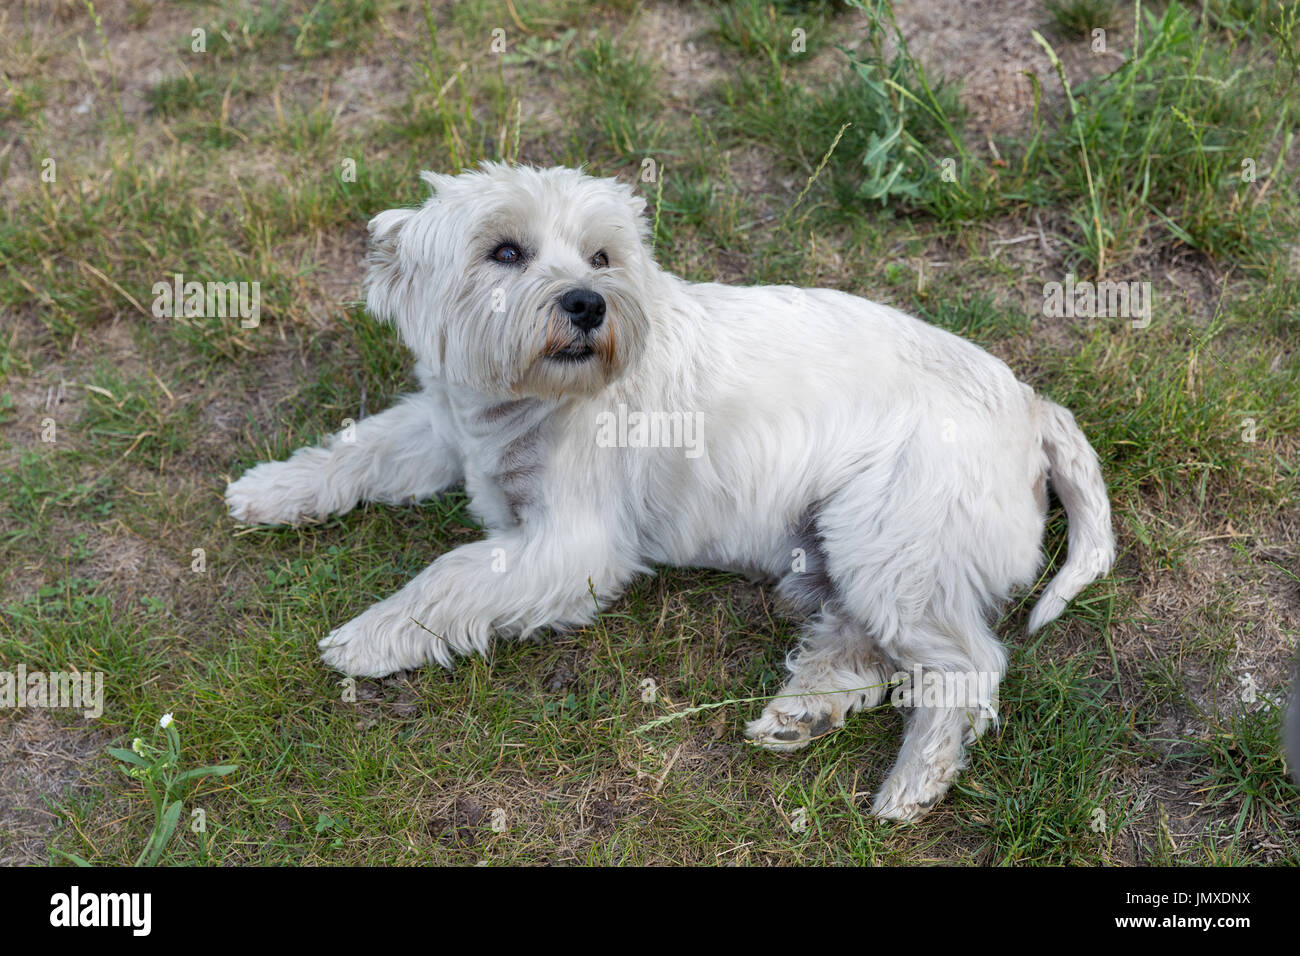 Westie dog lies on the groung closeup. West Highland White Terrier, commonly known as the Westie, a breed of dog from Scotland. Stock Photo